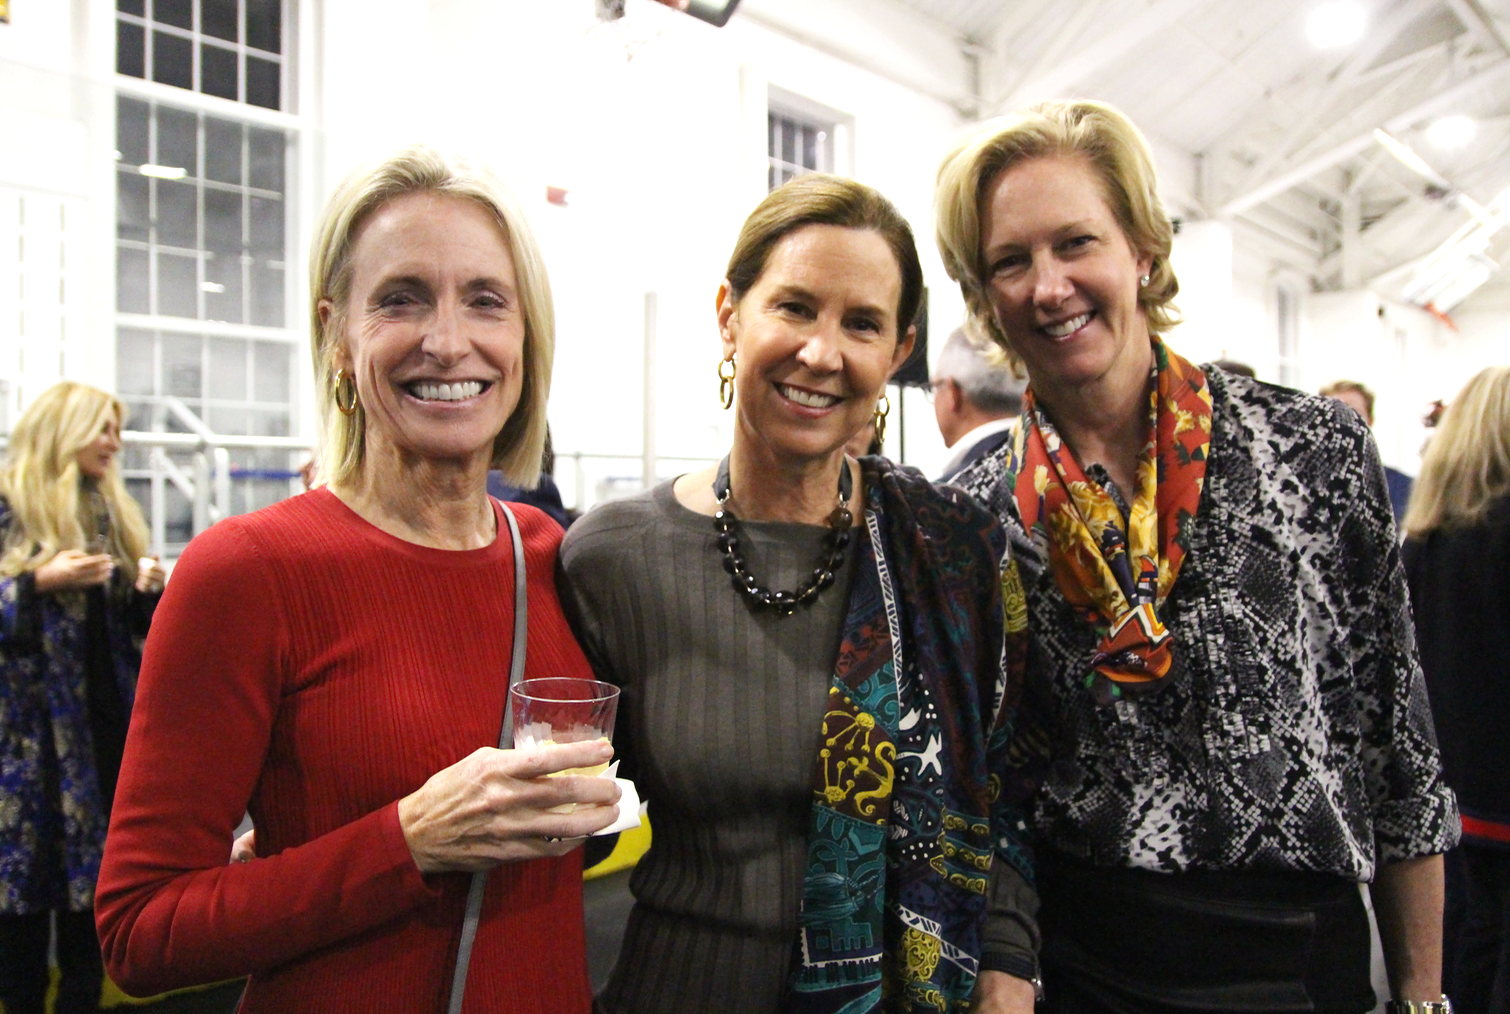 Lisa Stuart, Jenny Baldock and Michelle Binnie at the Youth of the Year event at the Boys & Girls Club of Greenwich event. Feb 7, 2019 Photo: Leslie Yager